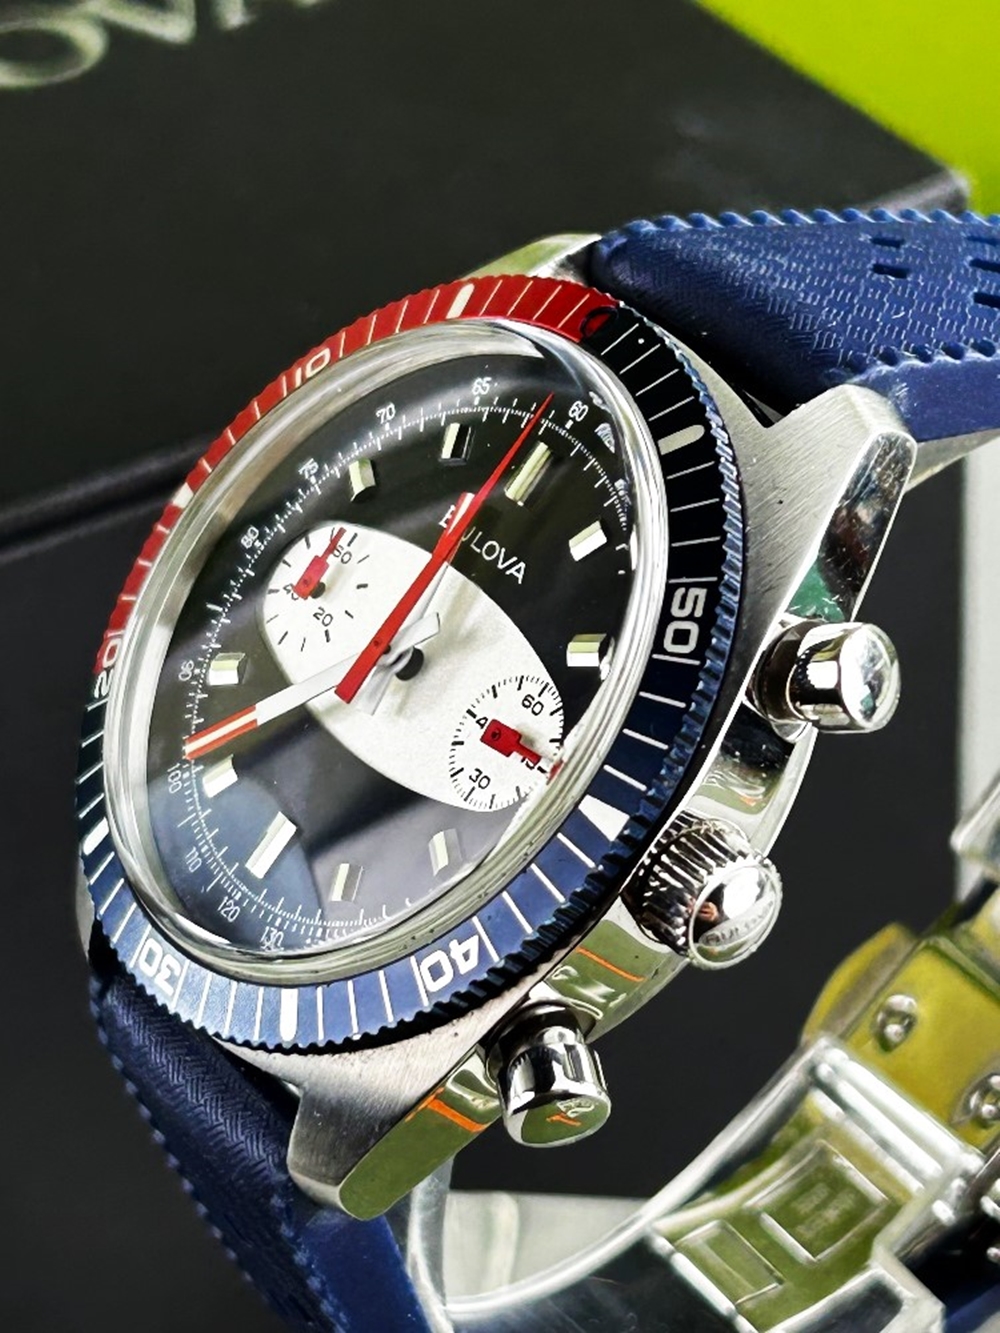 Bulova Archive Series Surfboard Chronograph Watch - Image 7 of 8